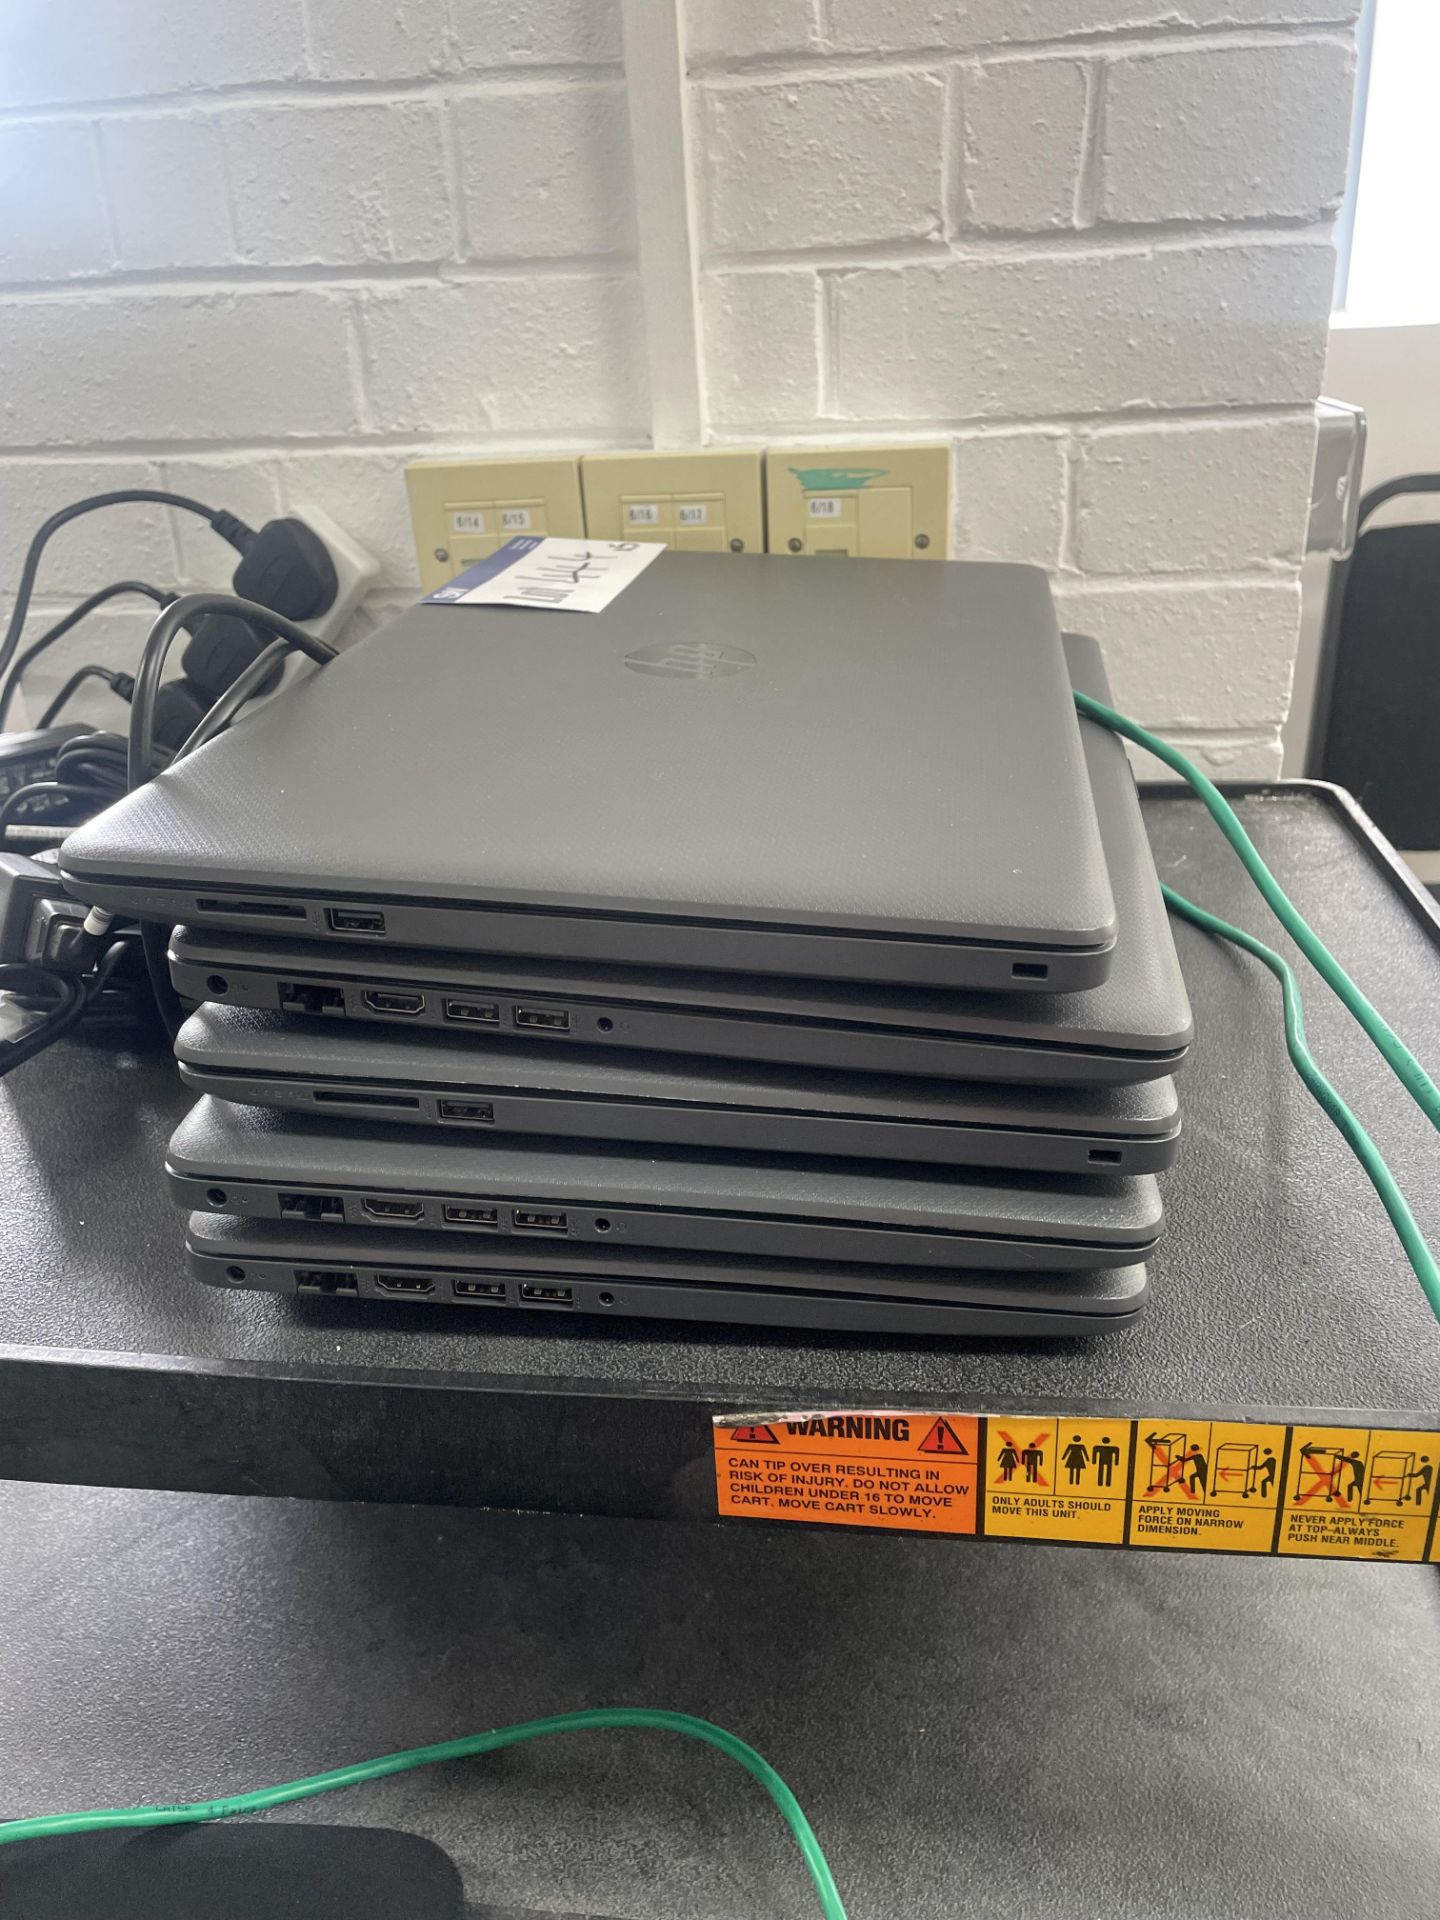 Five HP AMD Aflon Silver 3050U Laptops, with charg - Image 2 of 3